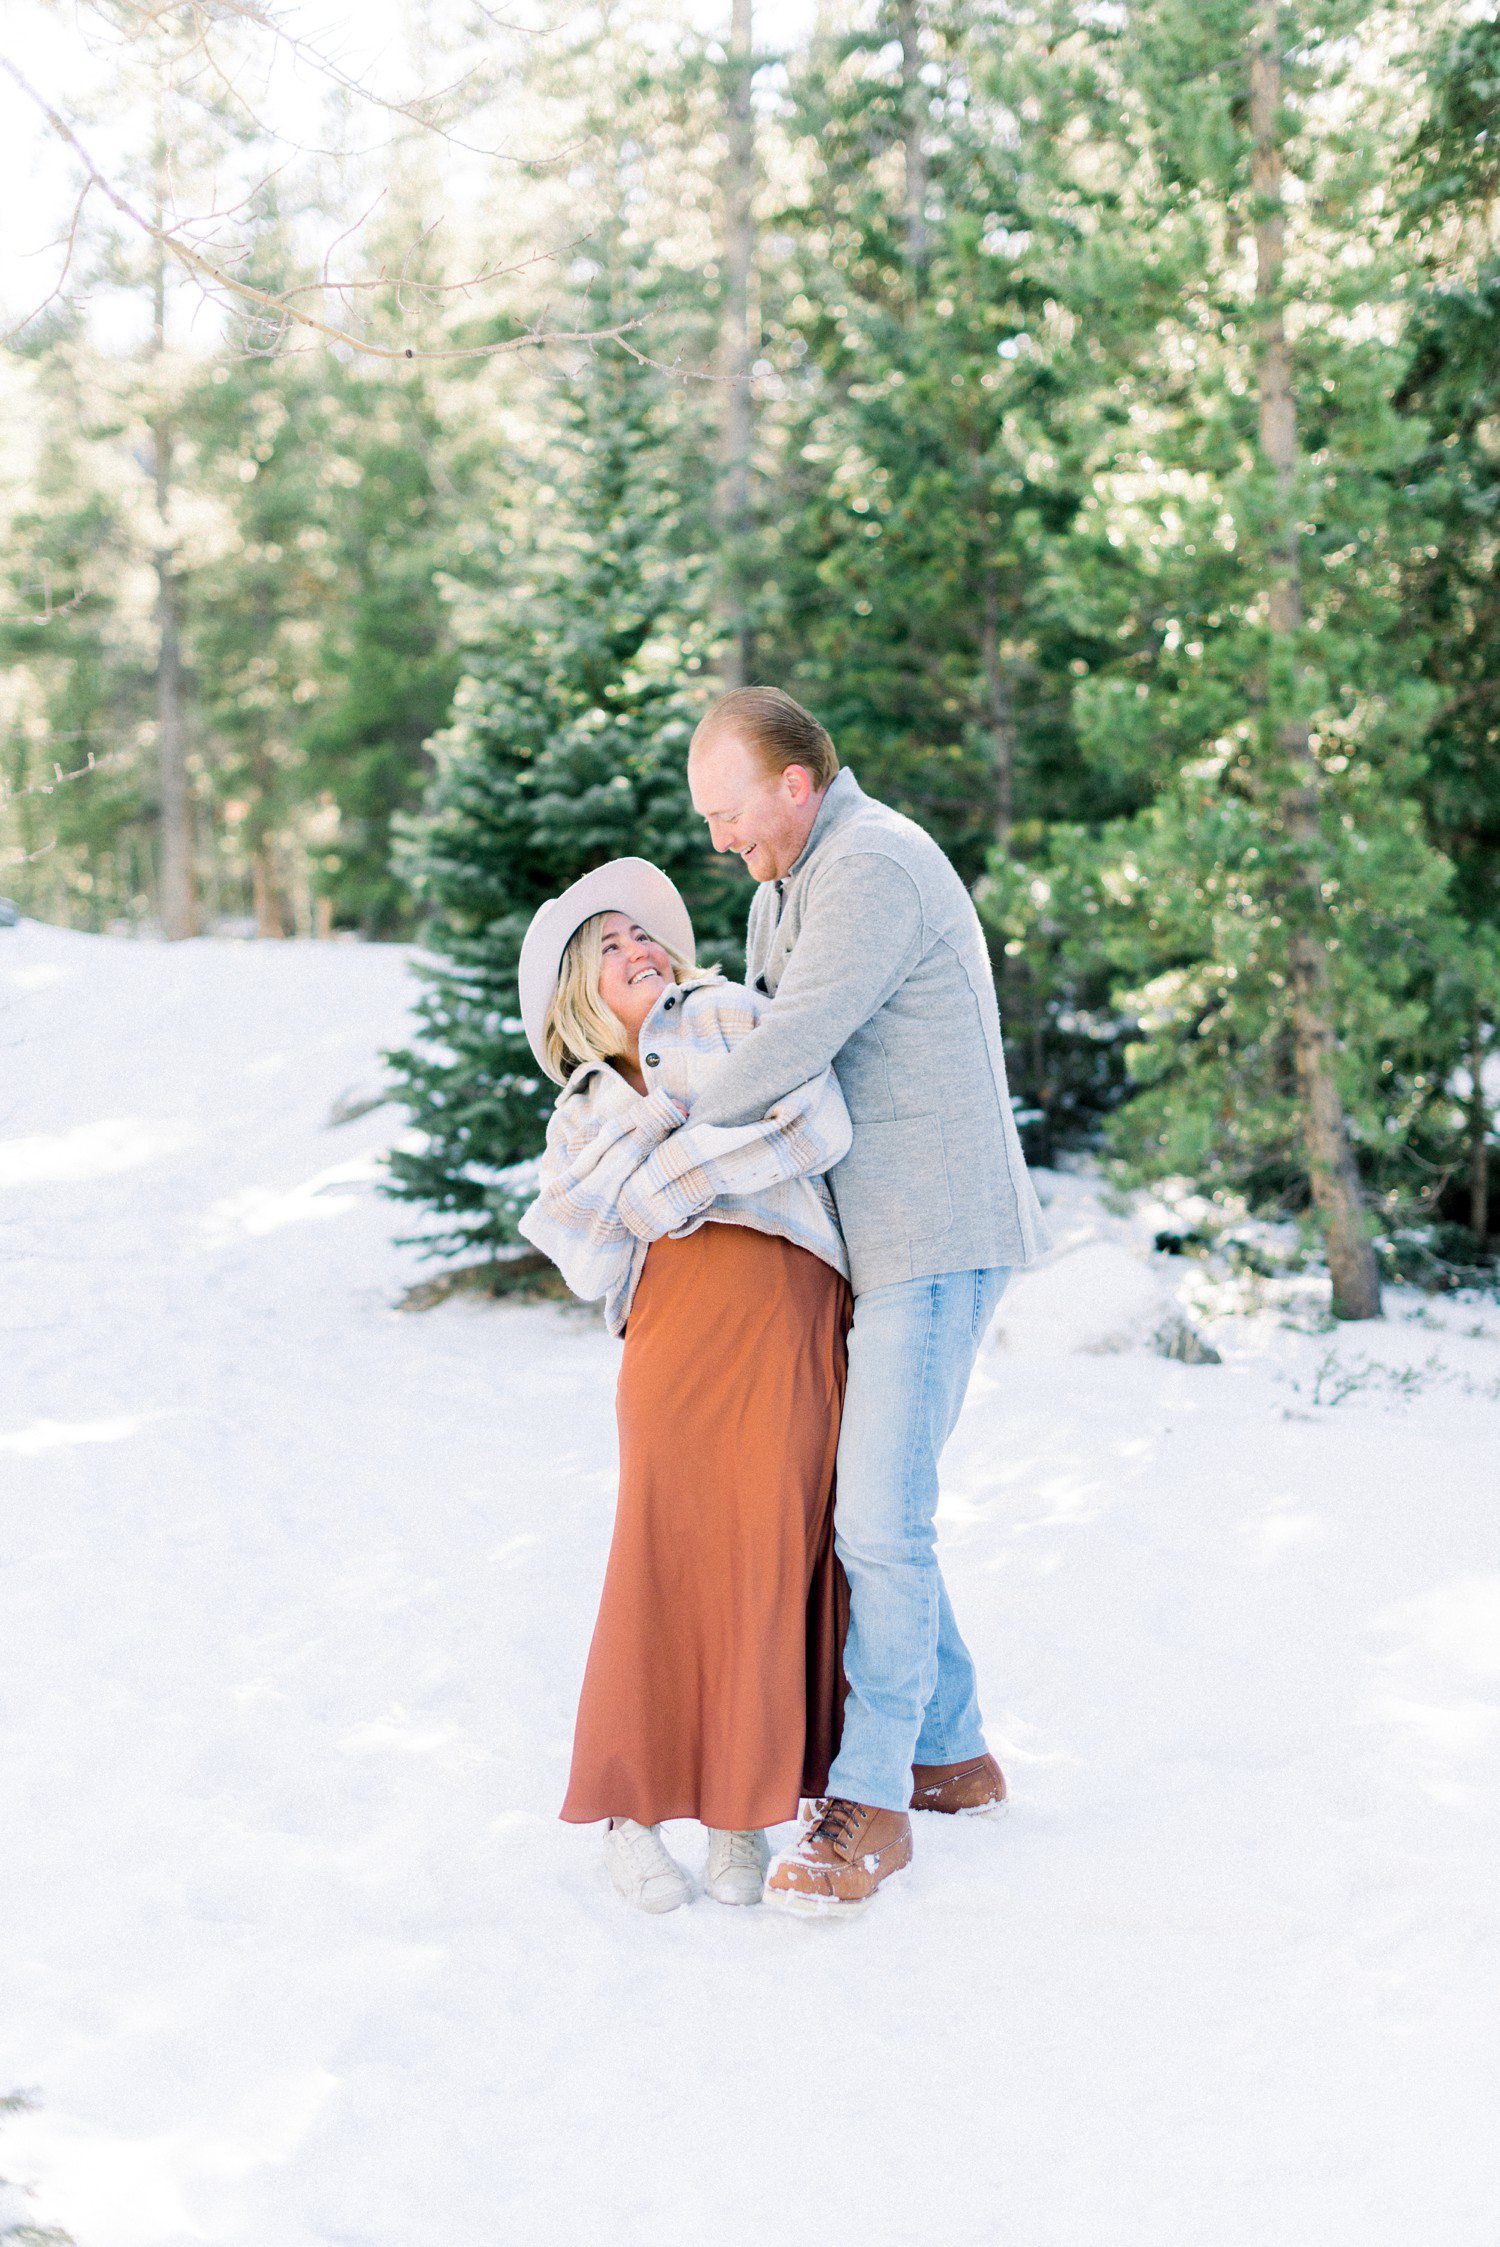 Colorado Engagement session at Officer's Gulch in winter.